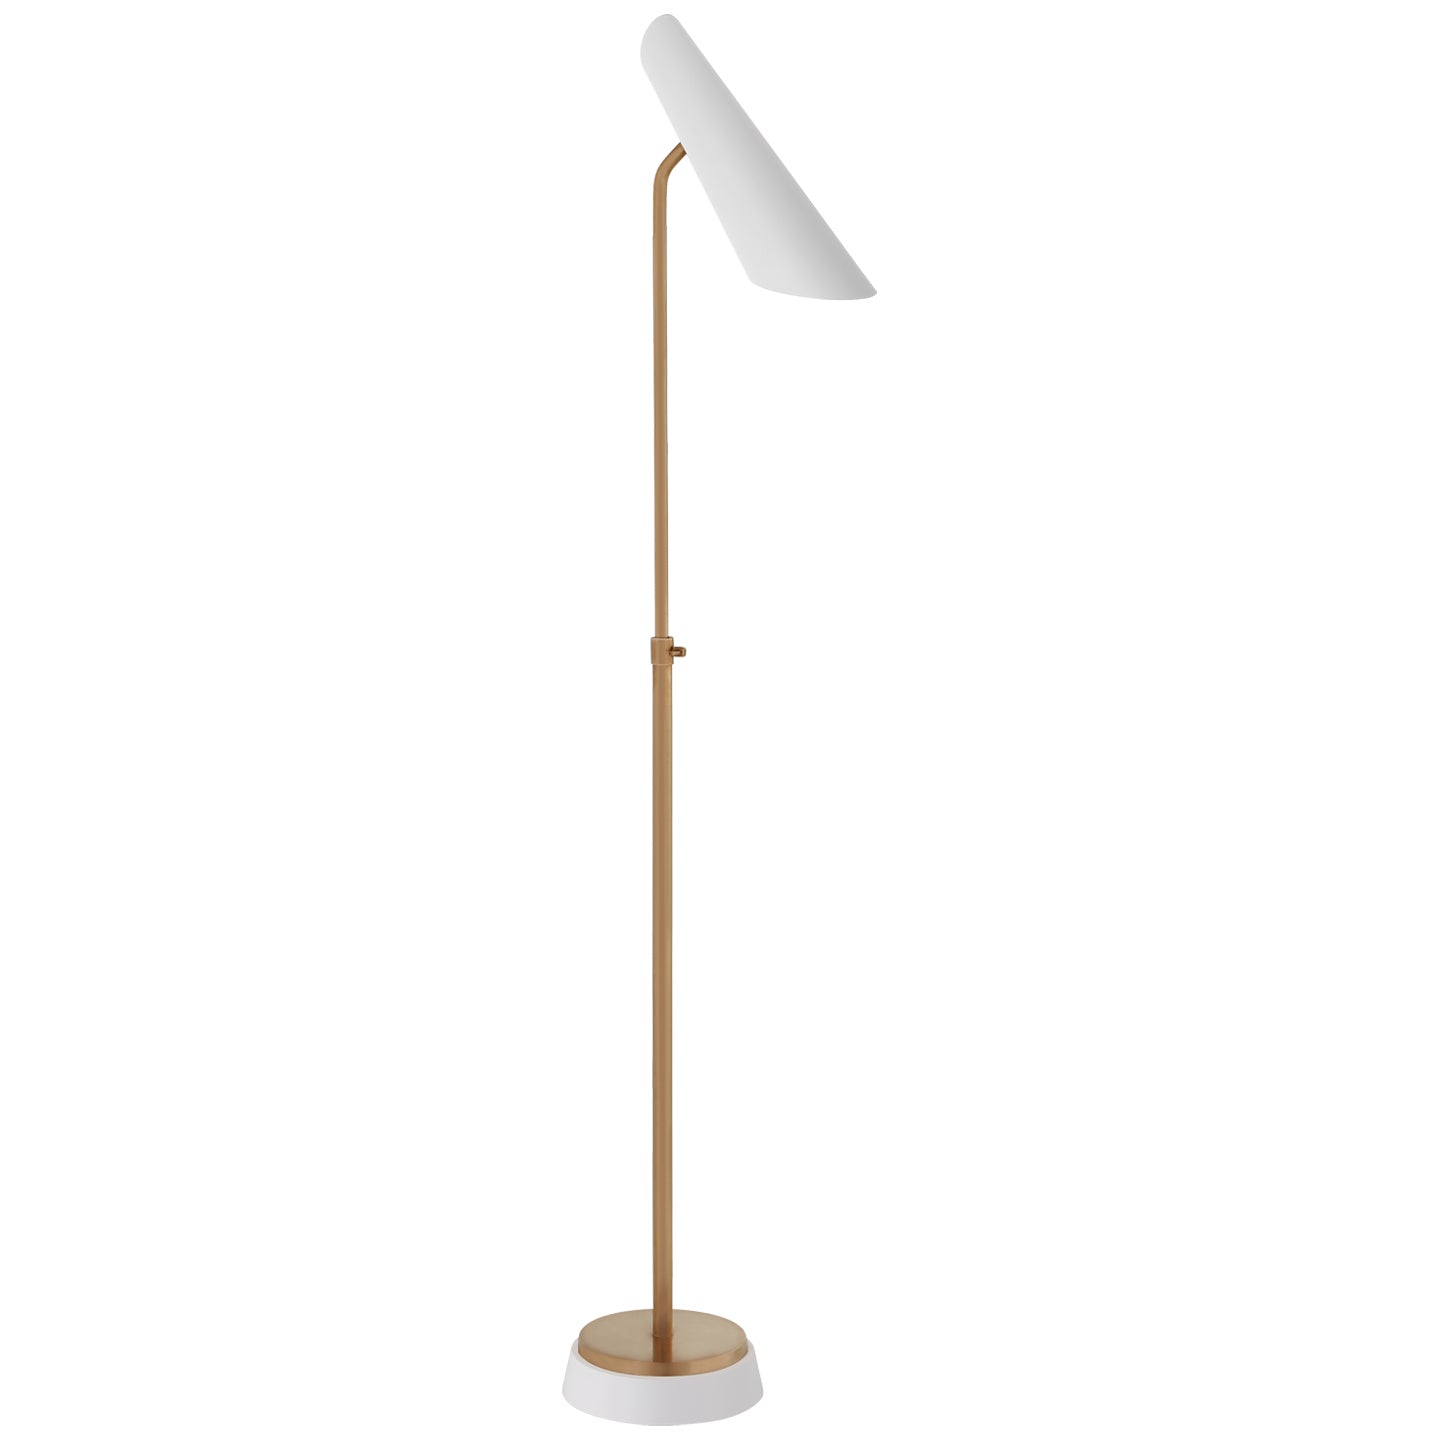 LED Floor Lamp from the Franca collection in Hand-Rubbed Antique Brass With White Shade finish